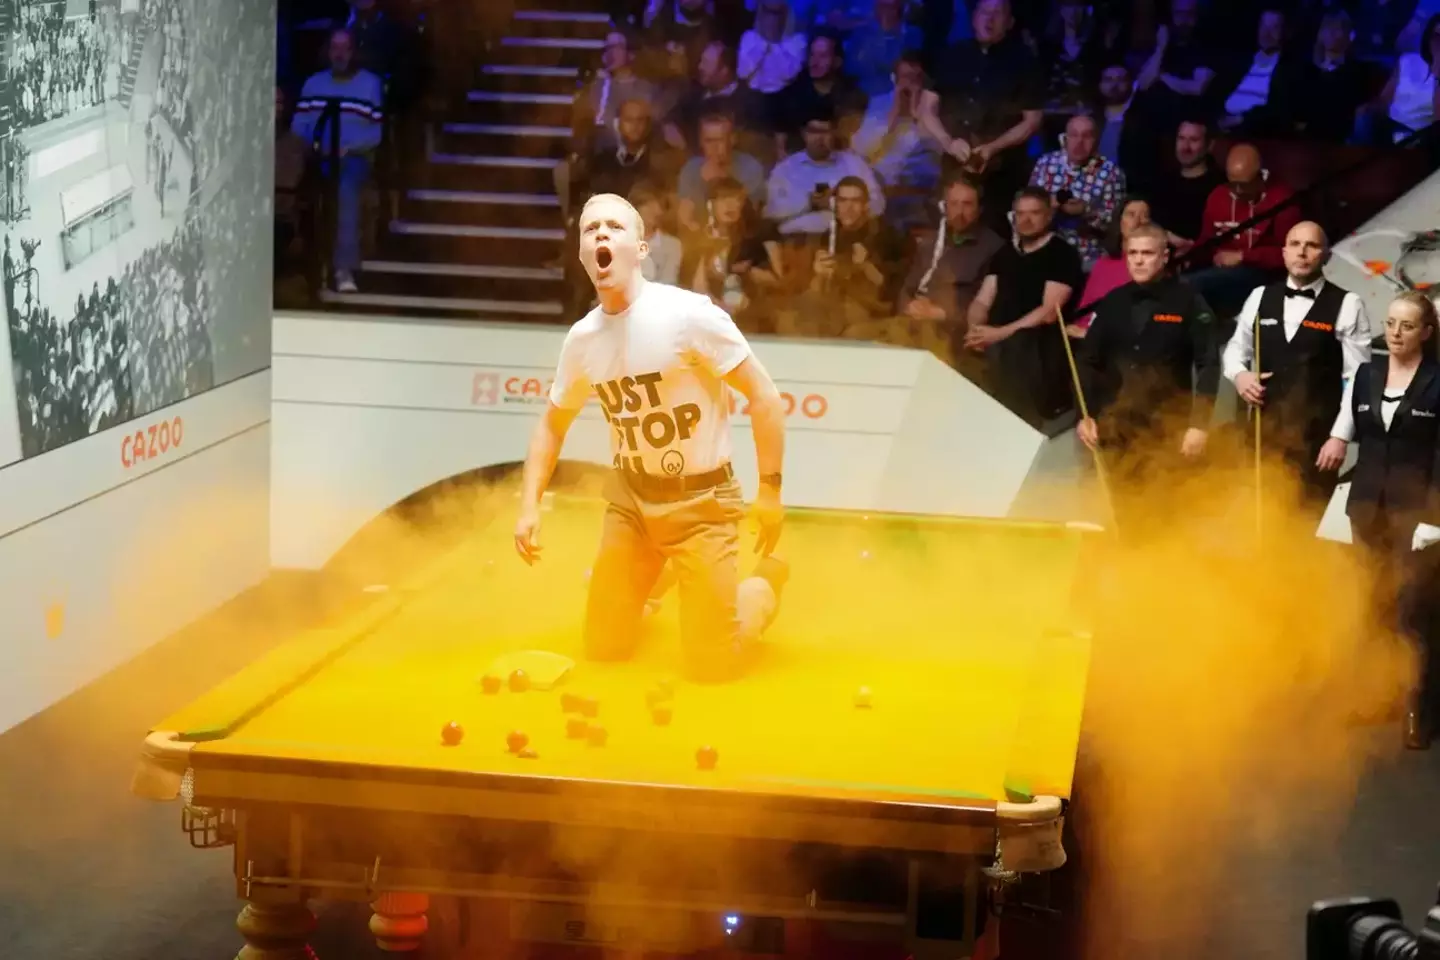 An activist who disrupted the World Snooker Championships last night (17 April) has been arrested six times in just a single year.